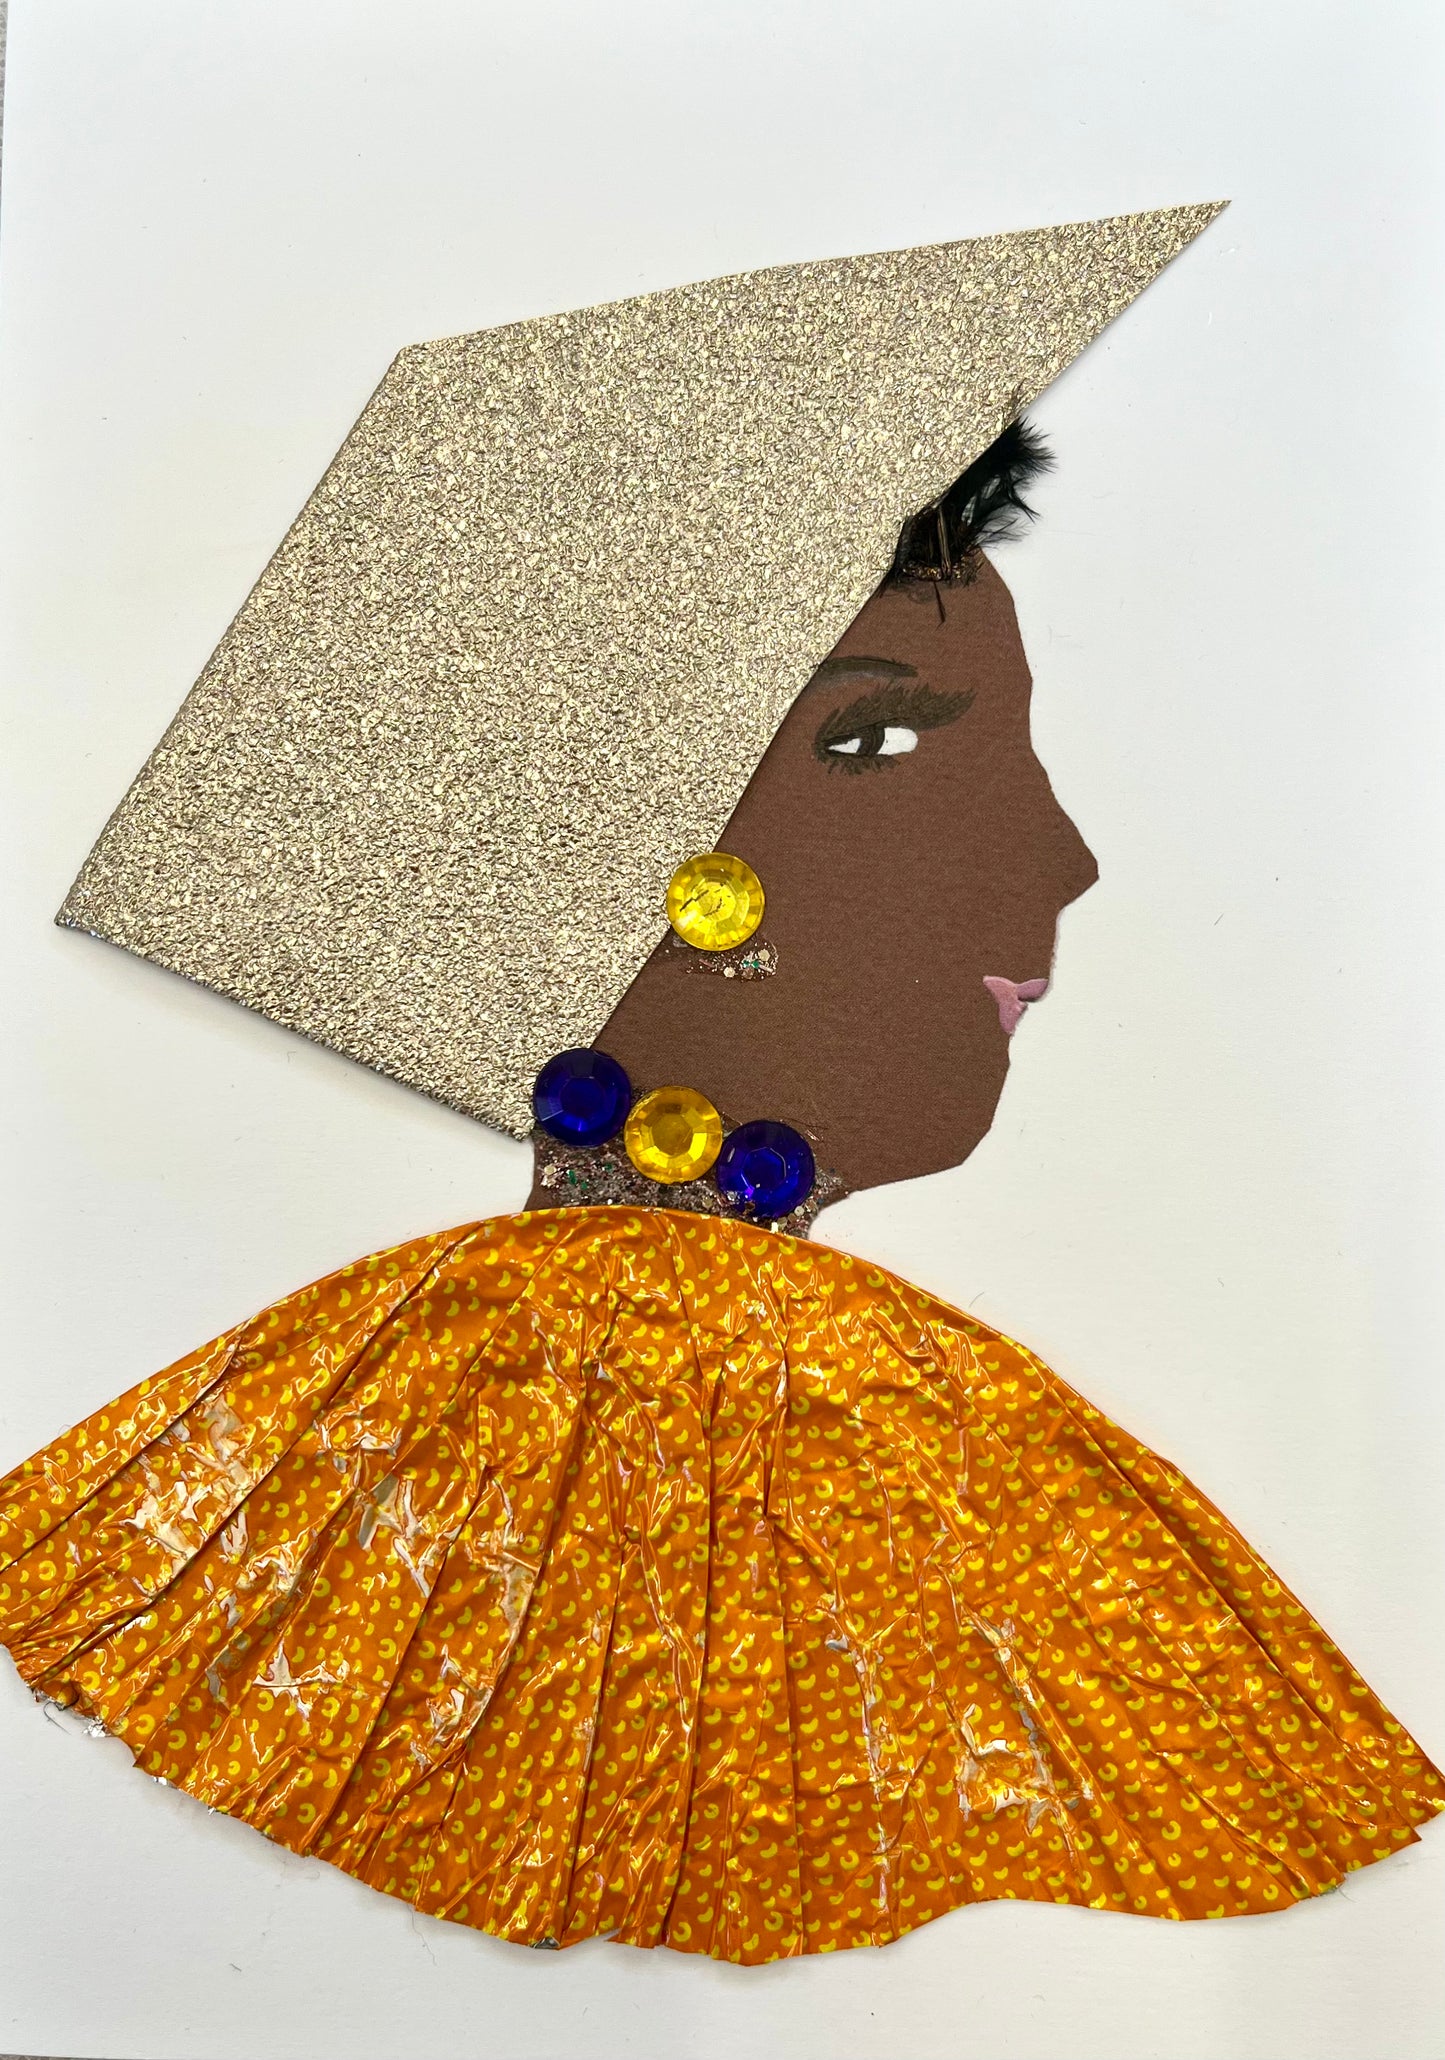 I designed this card of a woman named Ophelia Oxford. She has a brown skin tone and wears a sparkly silver hatinator with a yellow orange blouse. She wears blue and yellow gem jewellery. 